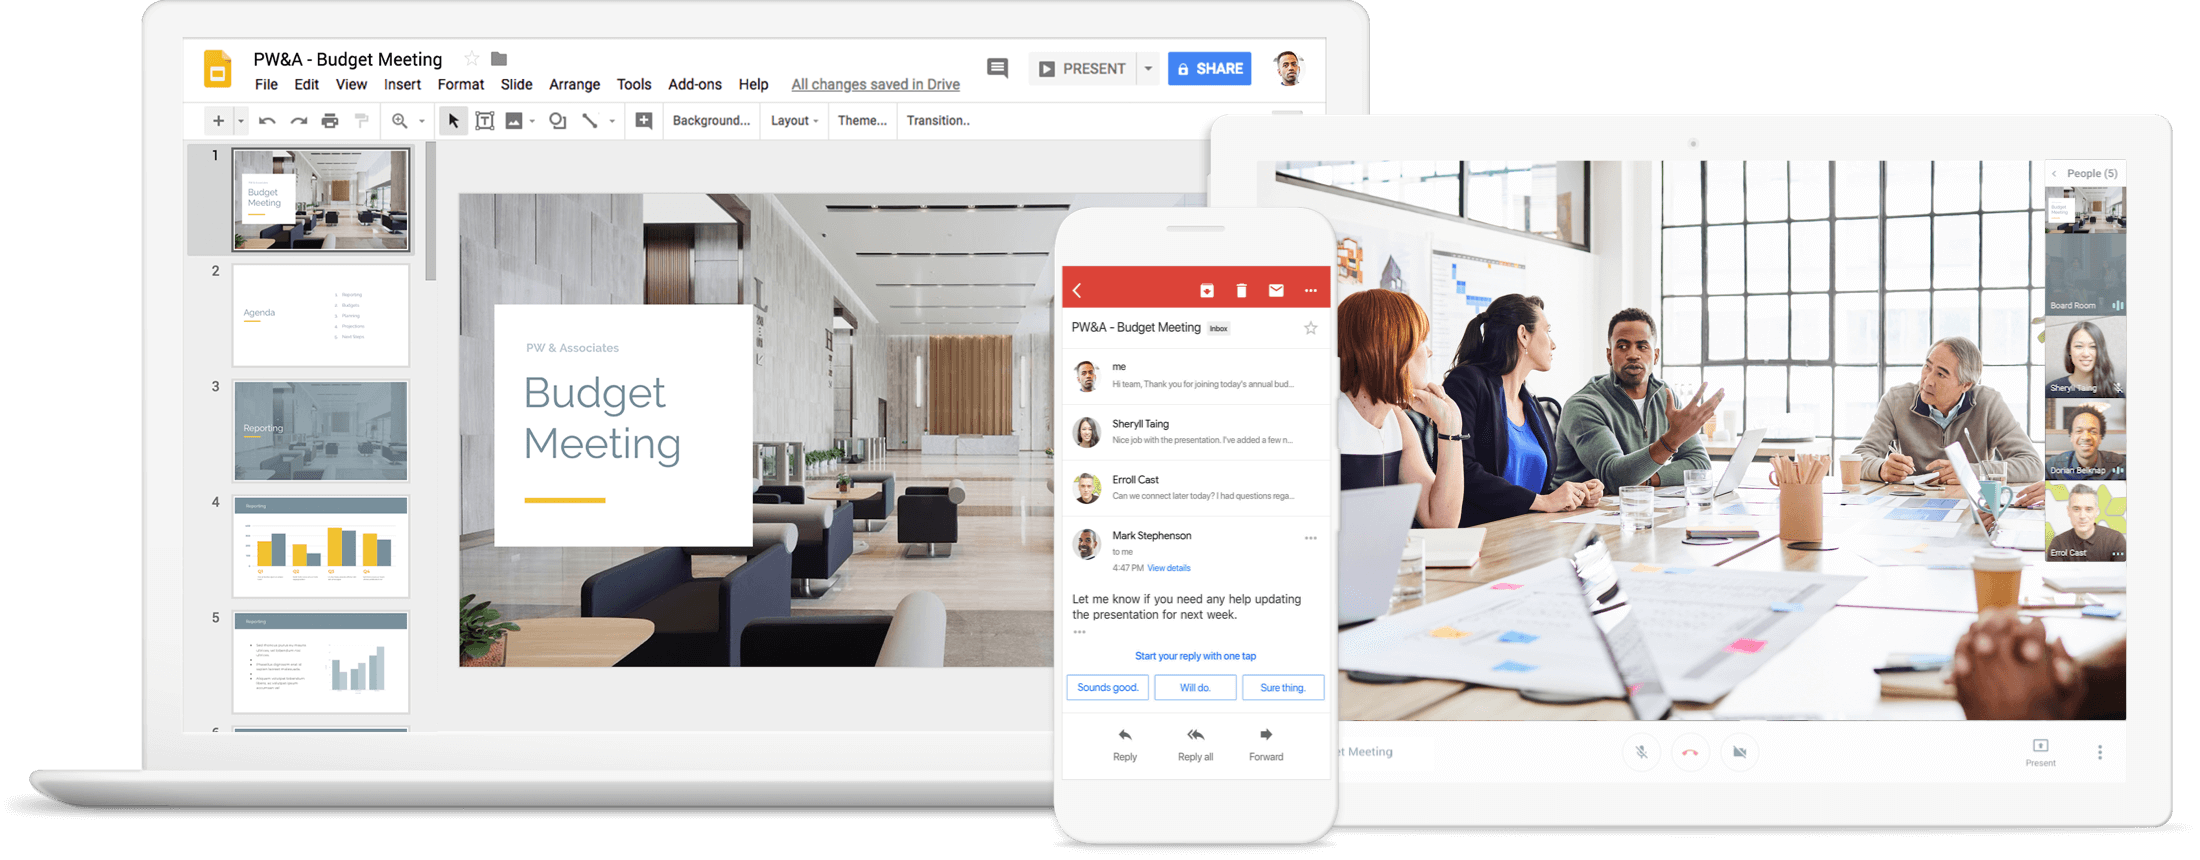 G Suite: Collaboration & Productivity Apps for Business2200 x 860